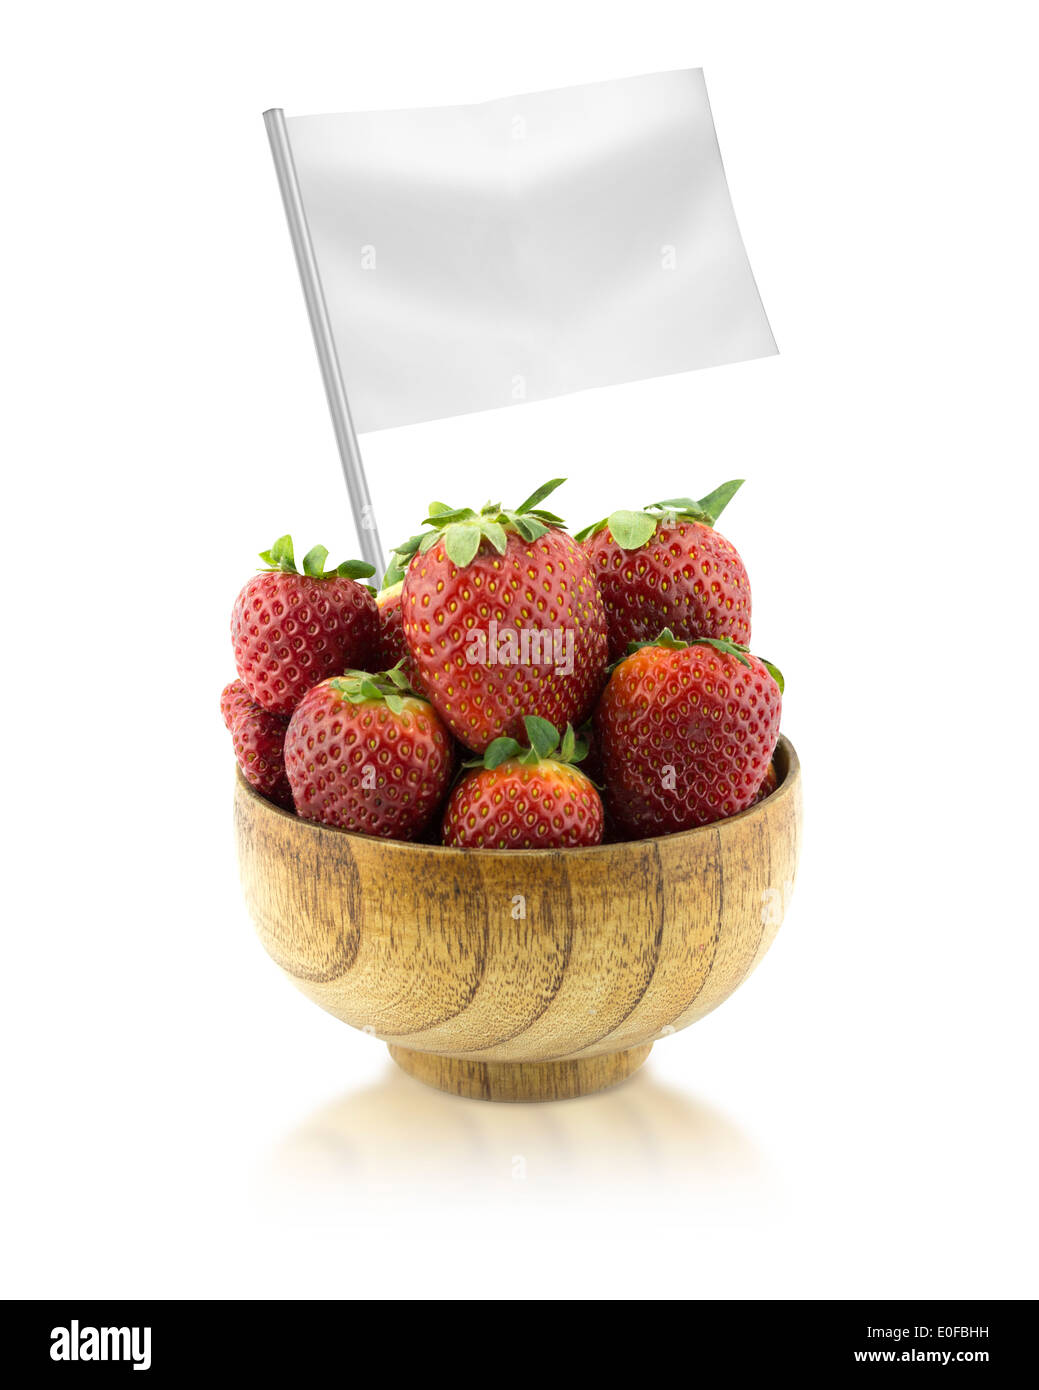 Healthy and organic food concept. Fresh Strawberries with flag showing the benefits or the price of fruits. Stock Photo